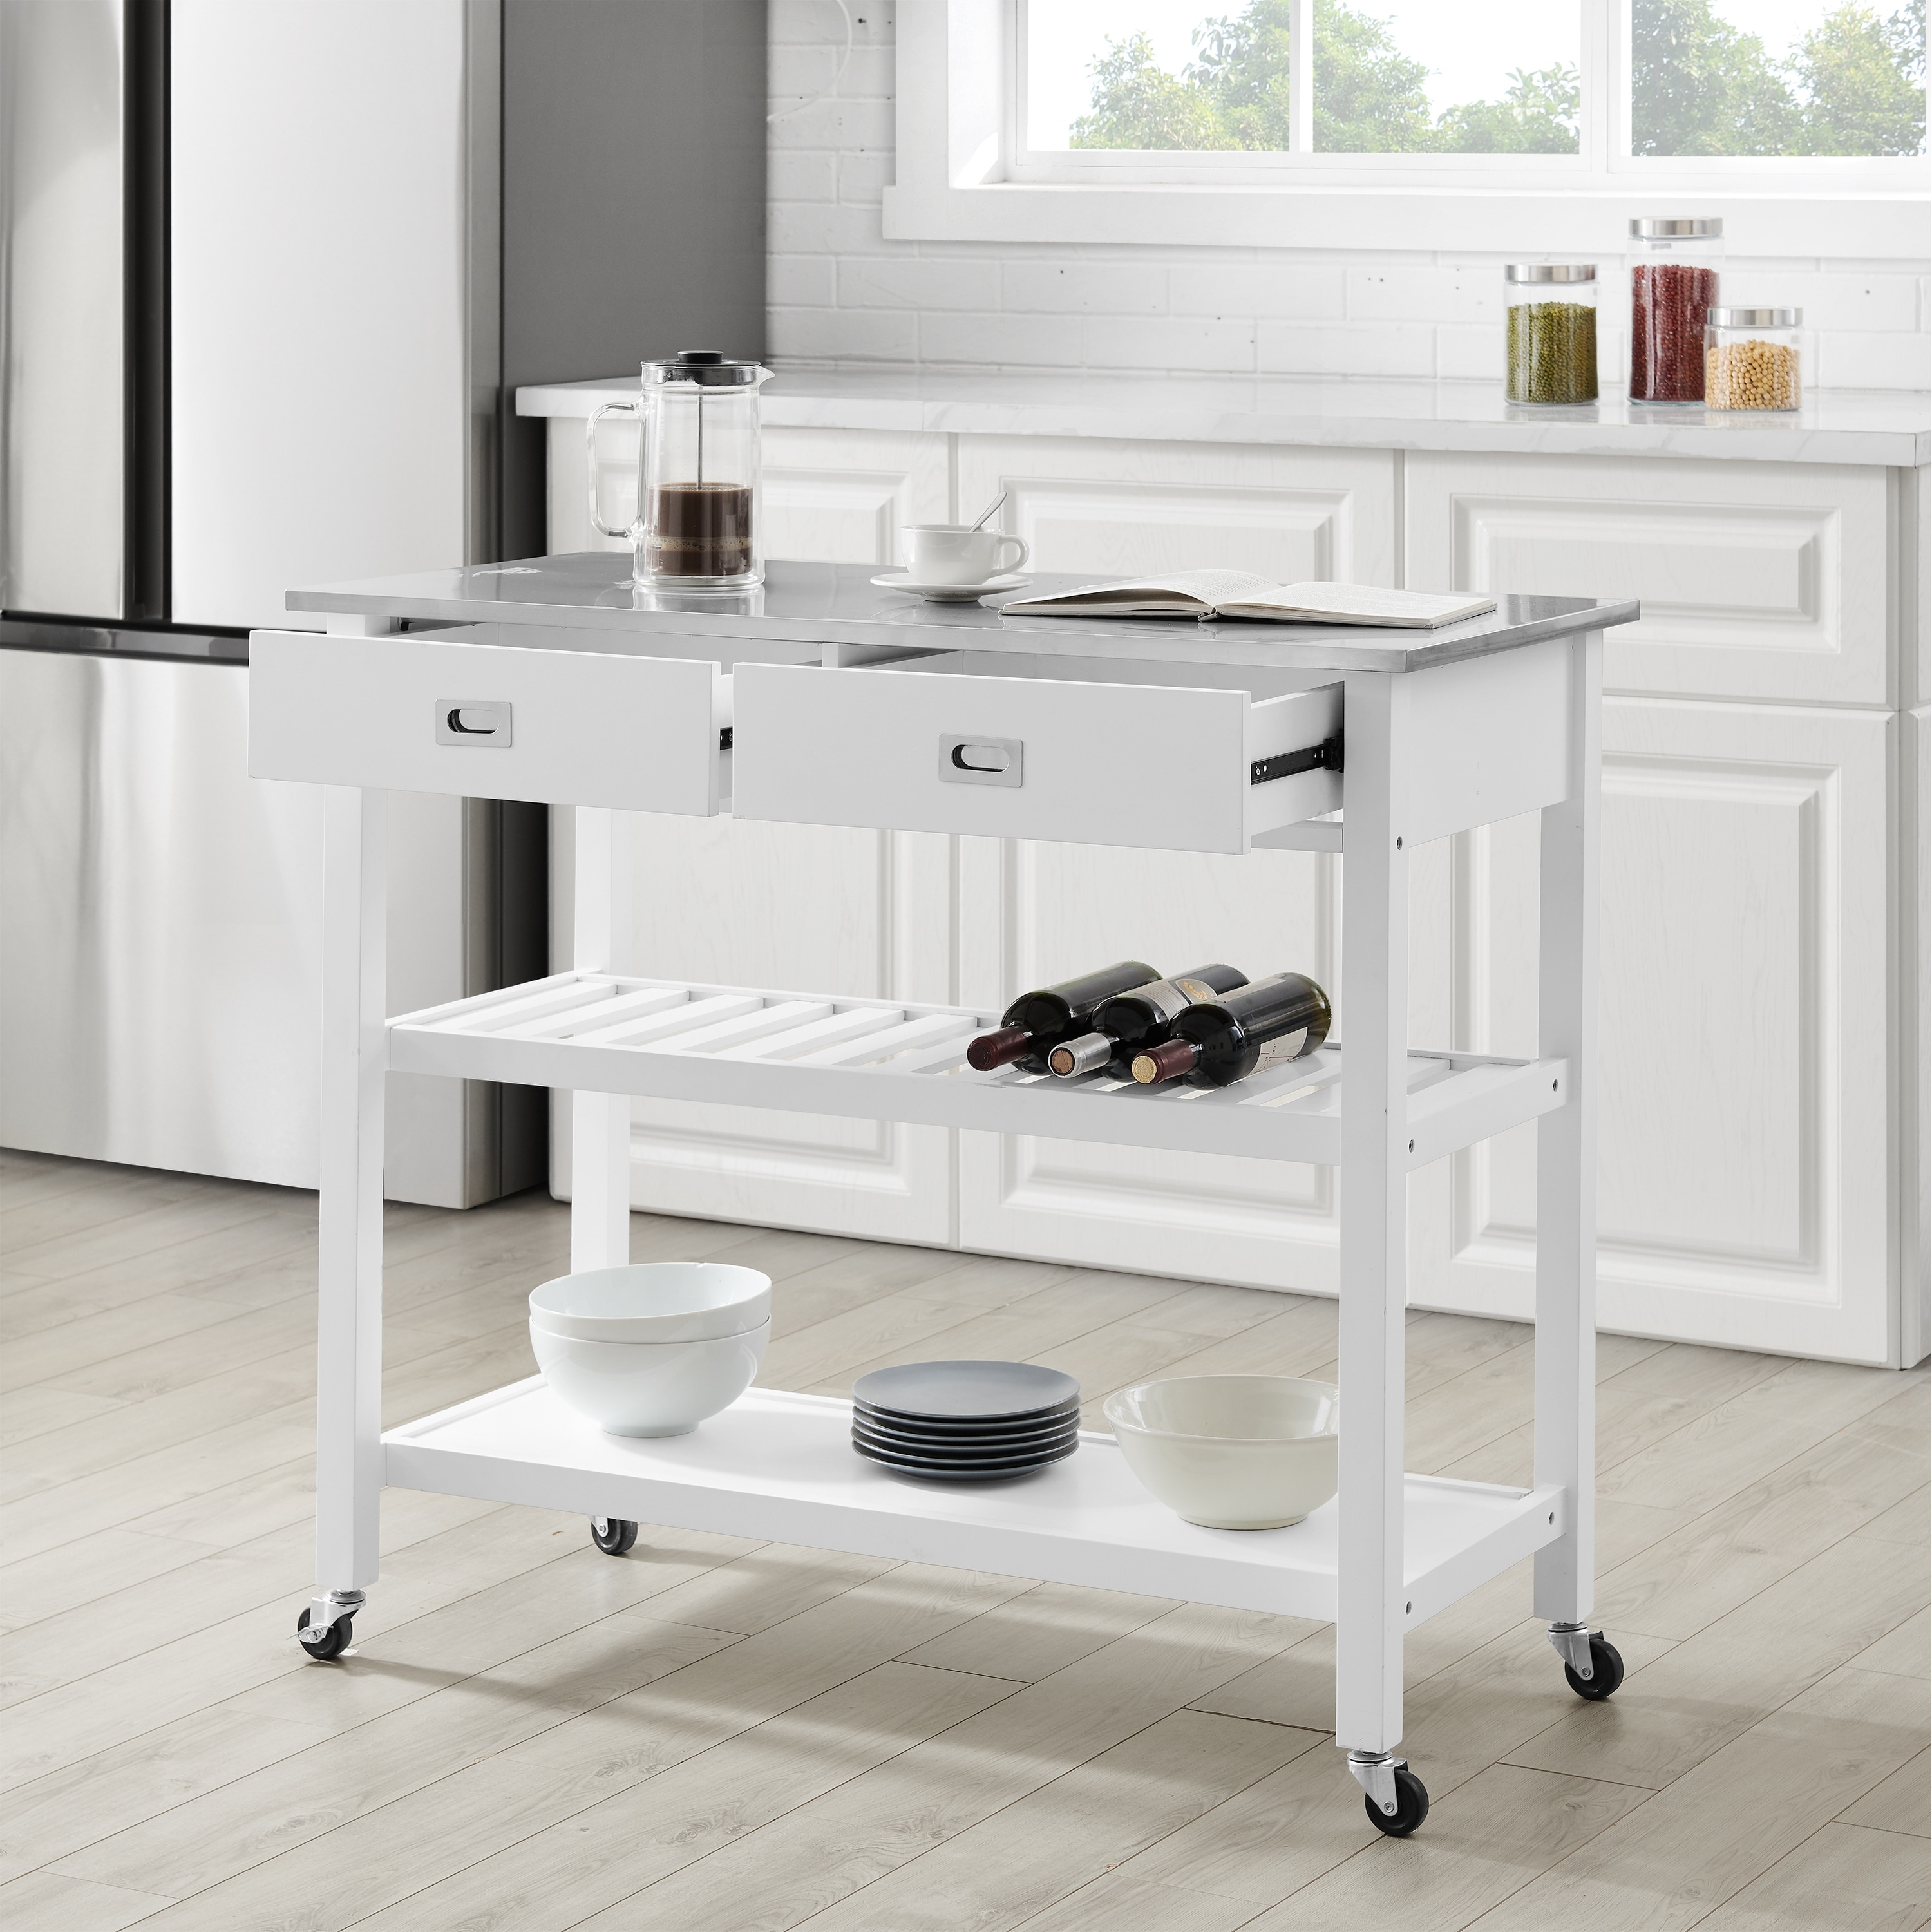 Chloe Stainless Steel Top Kitchen Island Cart 37H X 42W X 20D Overstock 31104175